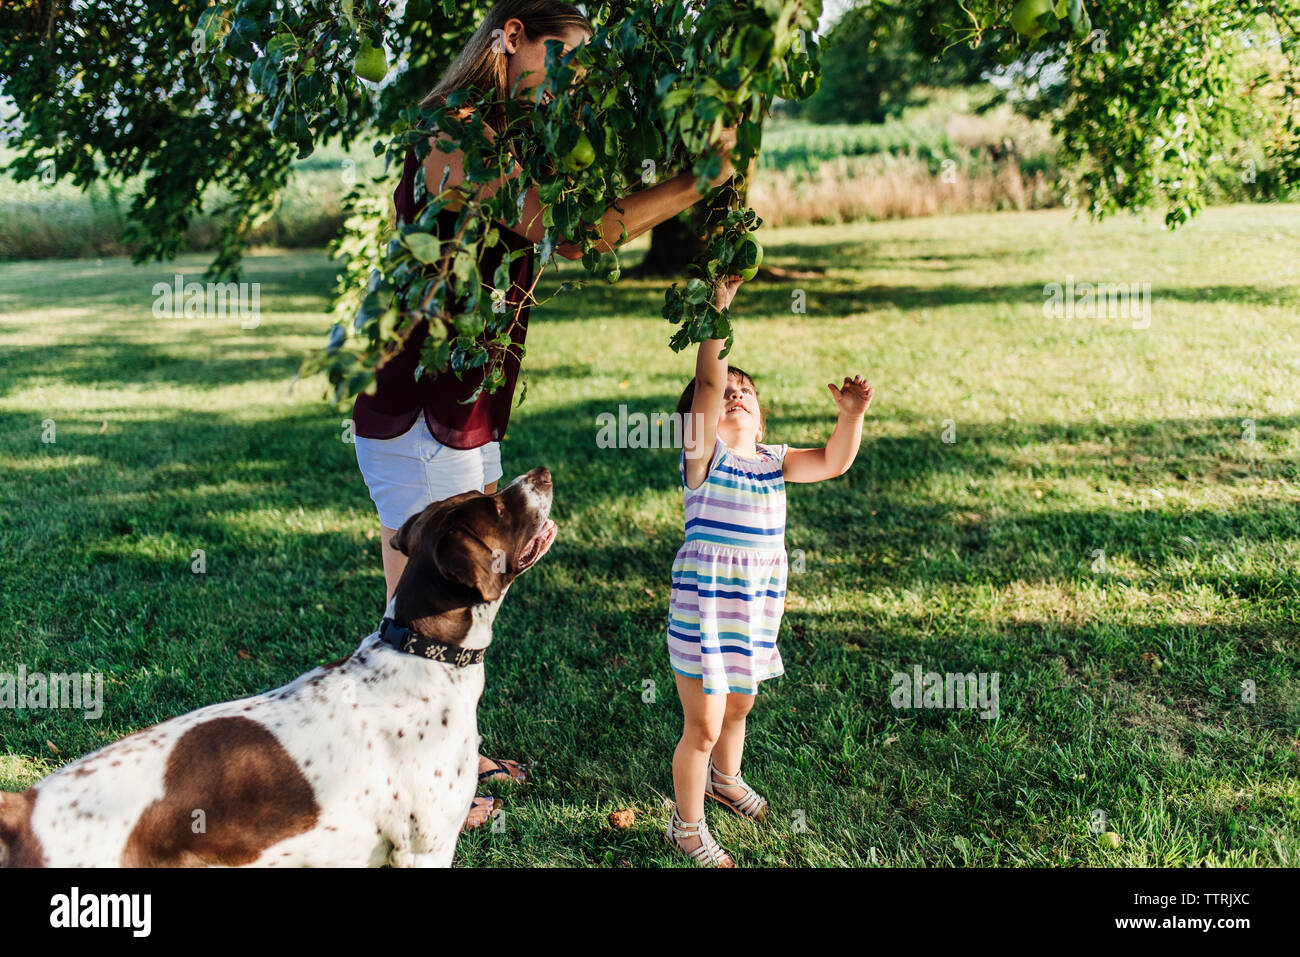 Mother assisting daughter in picking apples from tree while standing on grassy field Stock Photo